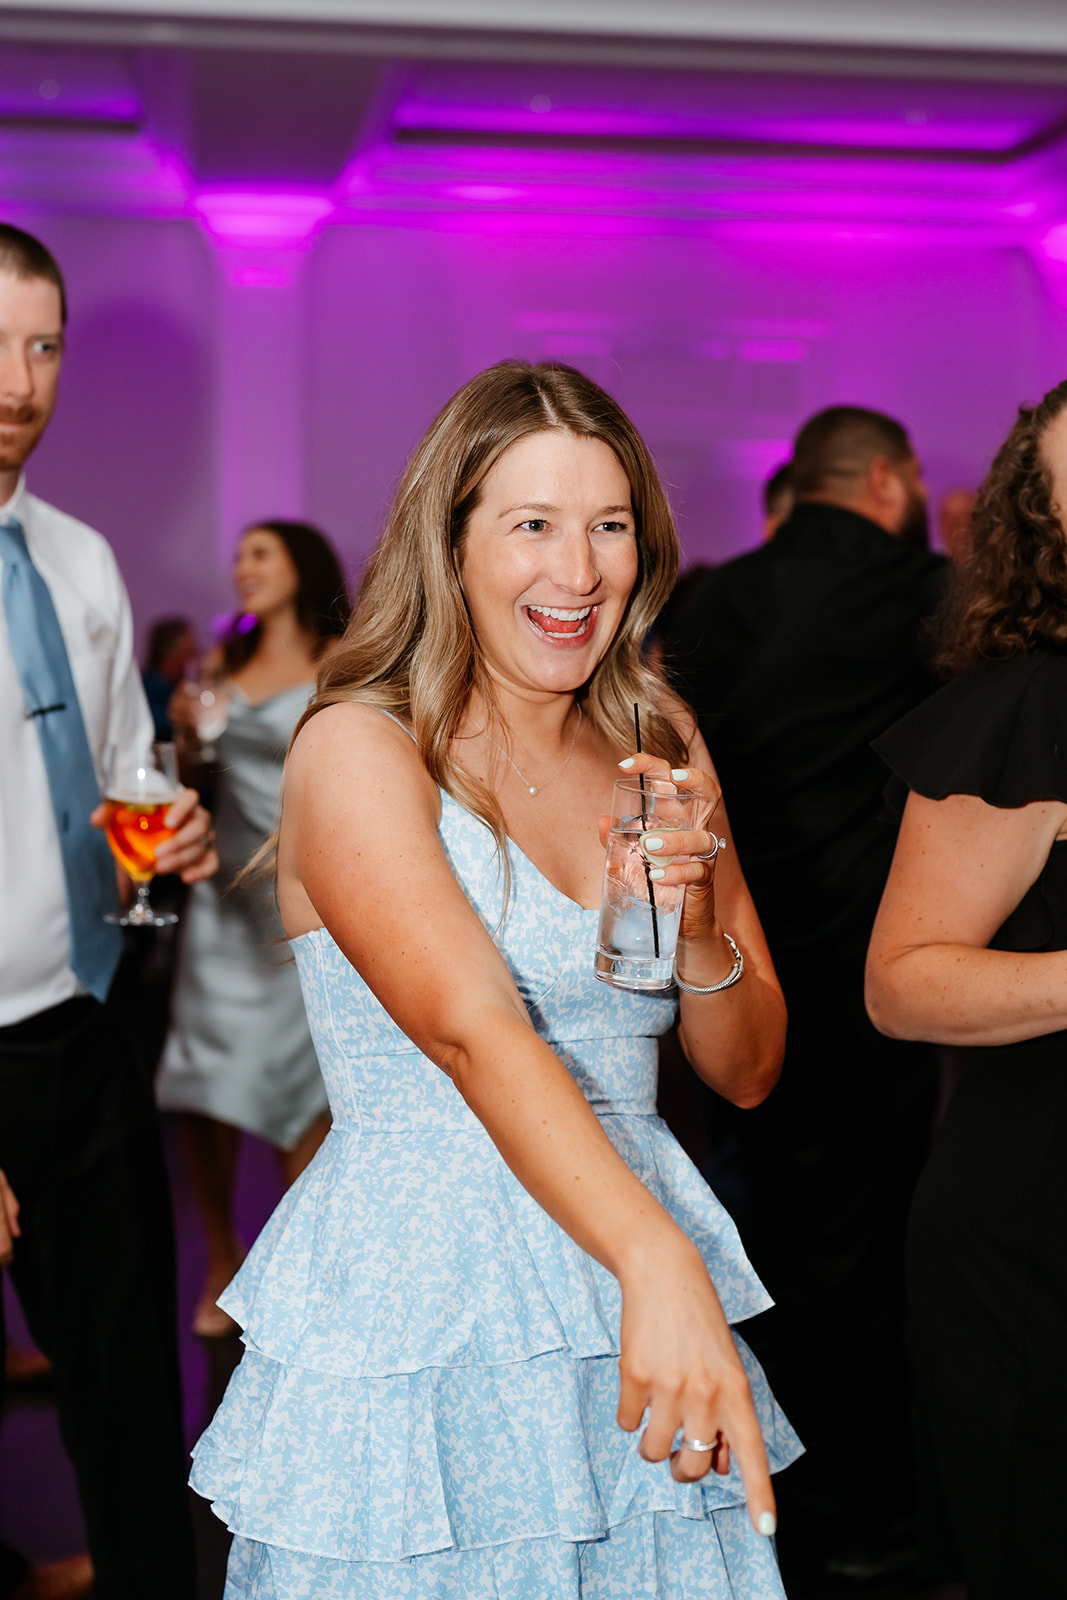 A woman in a blue dress holds a glass of water and smiles at wedding with purple lighting in the background.